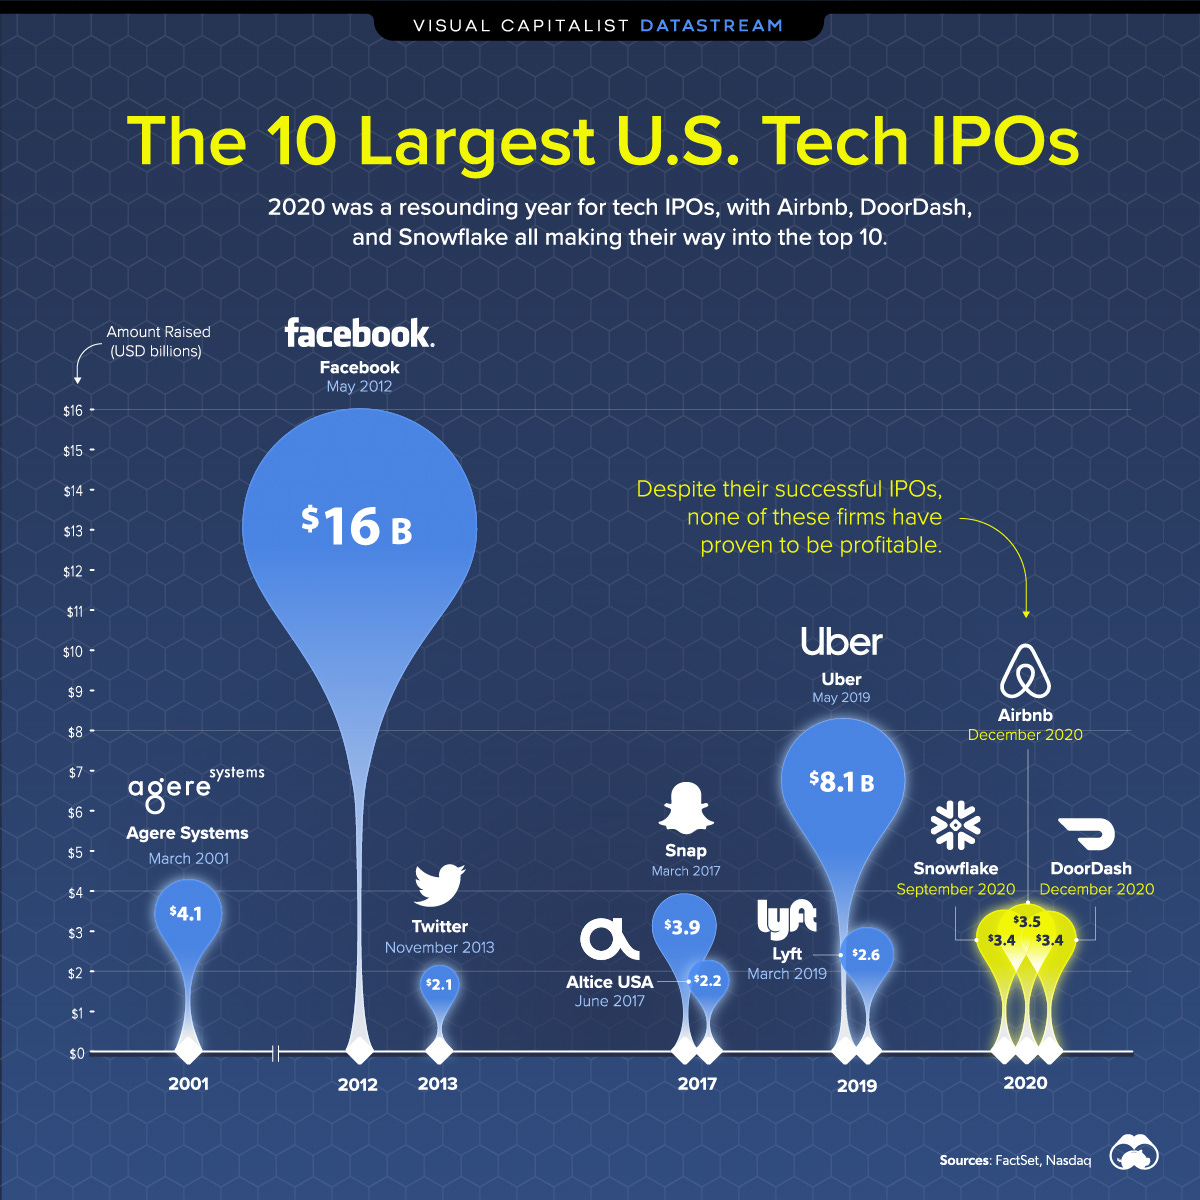 The credit for the graphic goes to Visual Capitalist (https://www.visualcapitalist.com/10-largest-u-s-tech-ipos-history/)